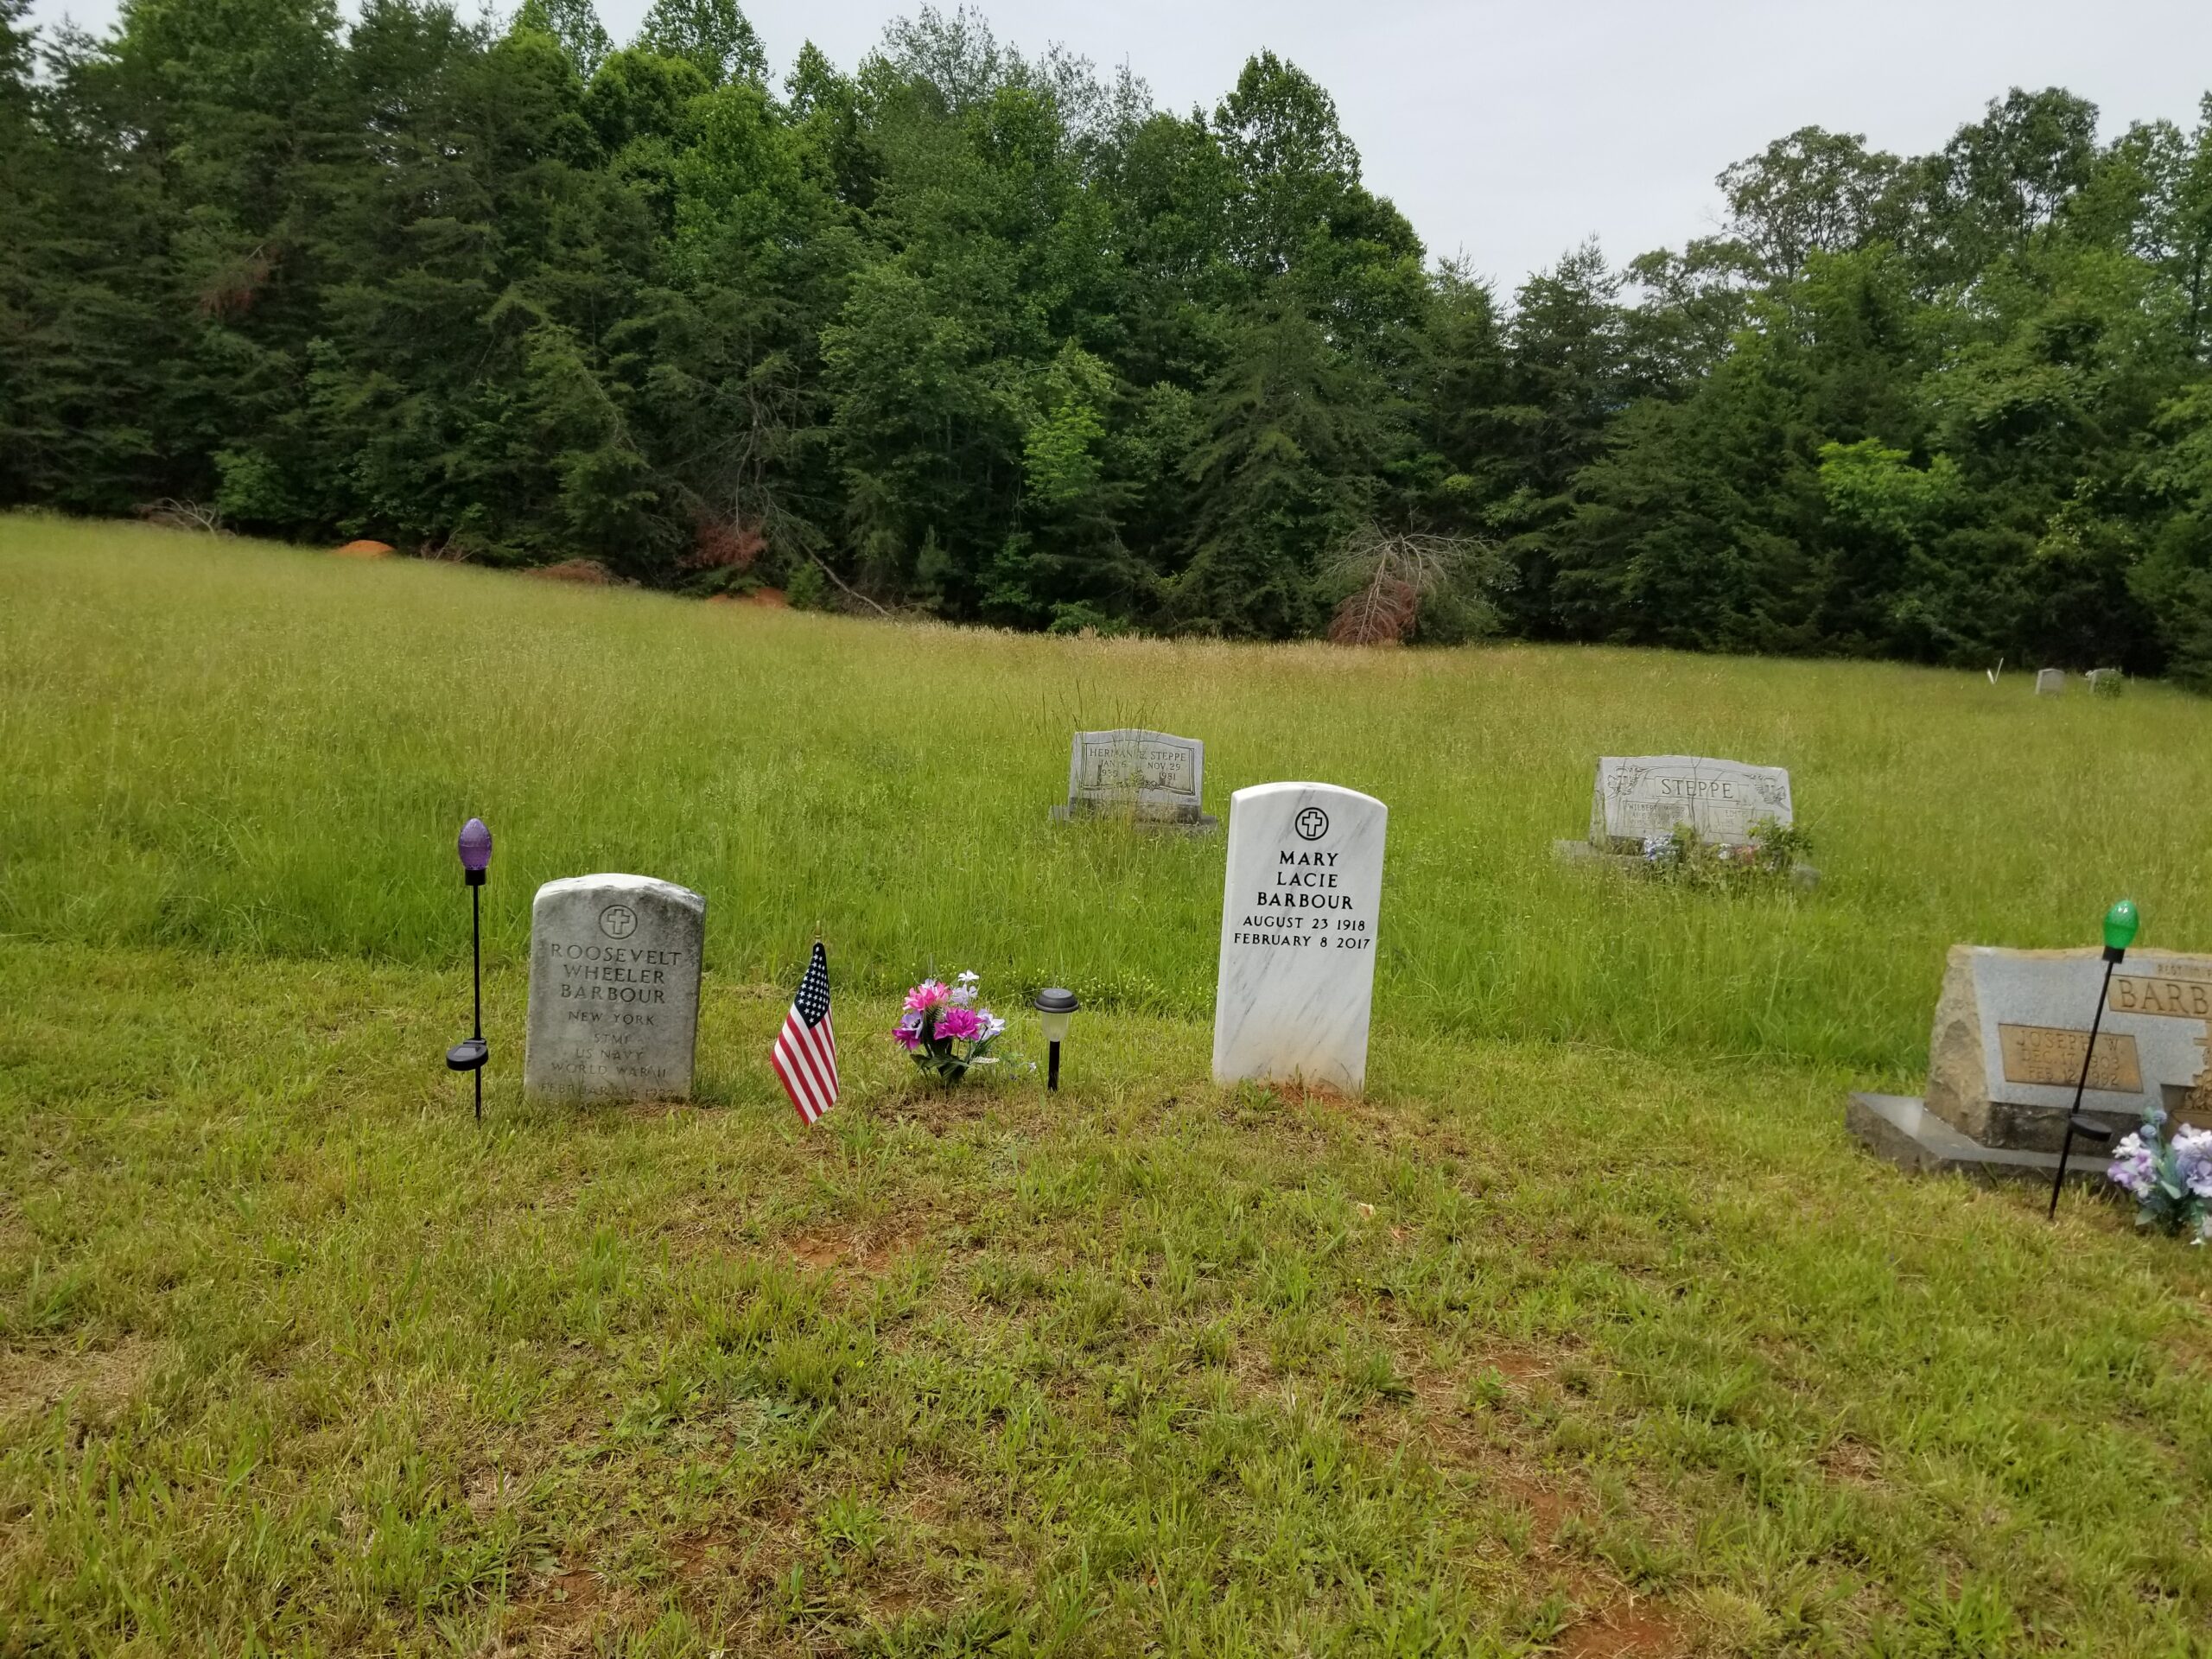 A view of Mt. Olivet Baptist Church Cemetery, a community burying ground owned and cared for by the church and its congregation.